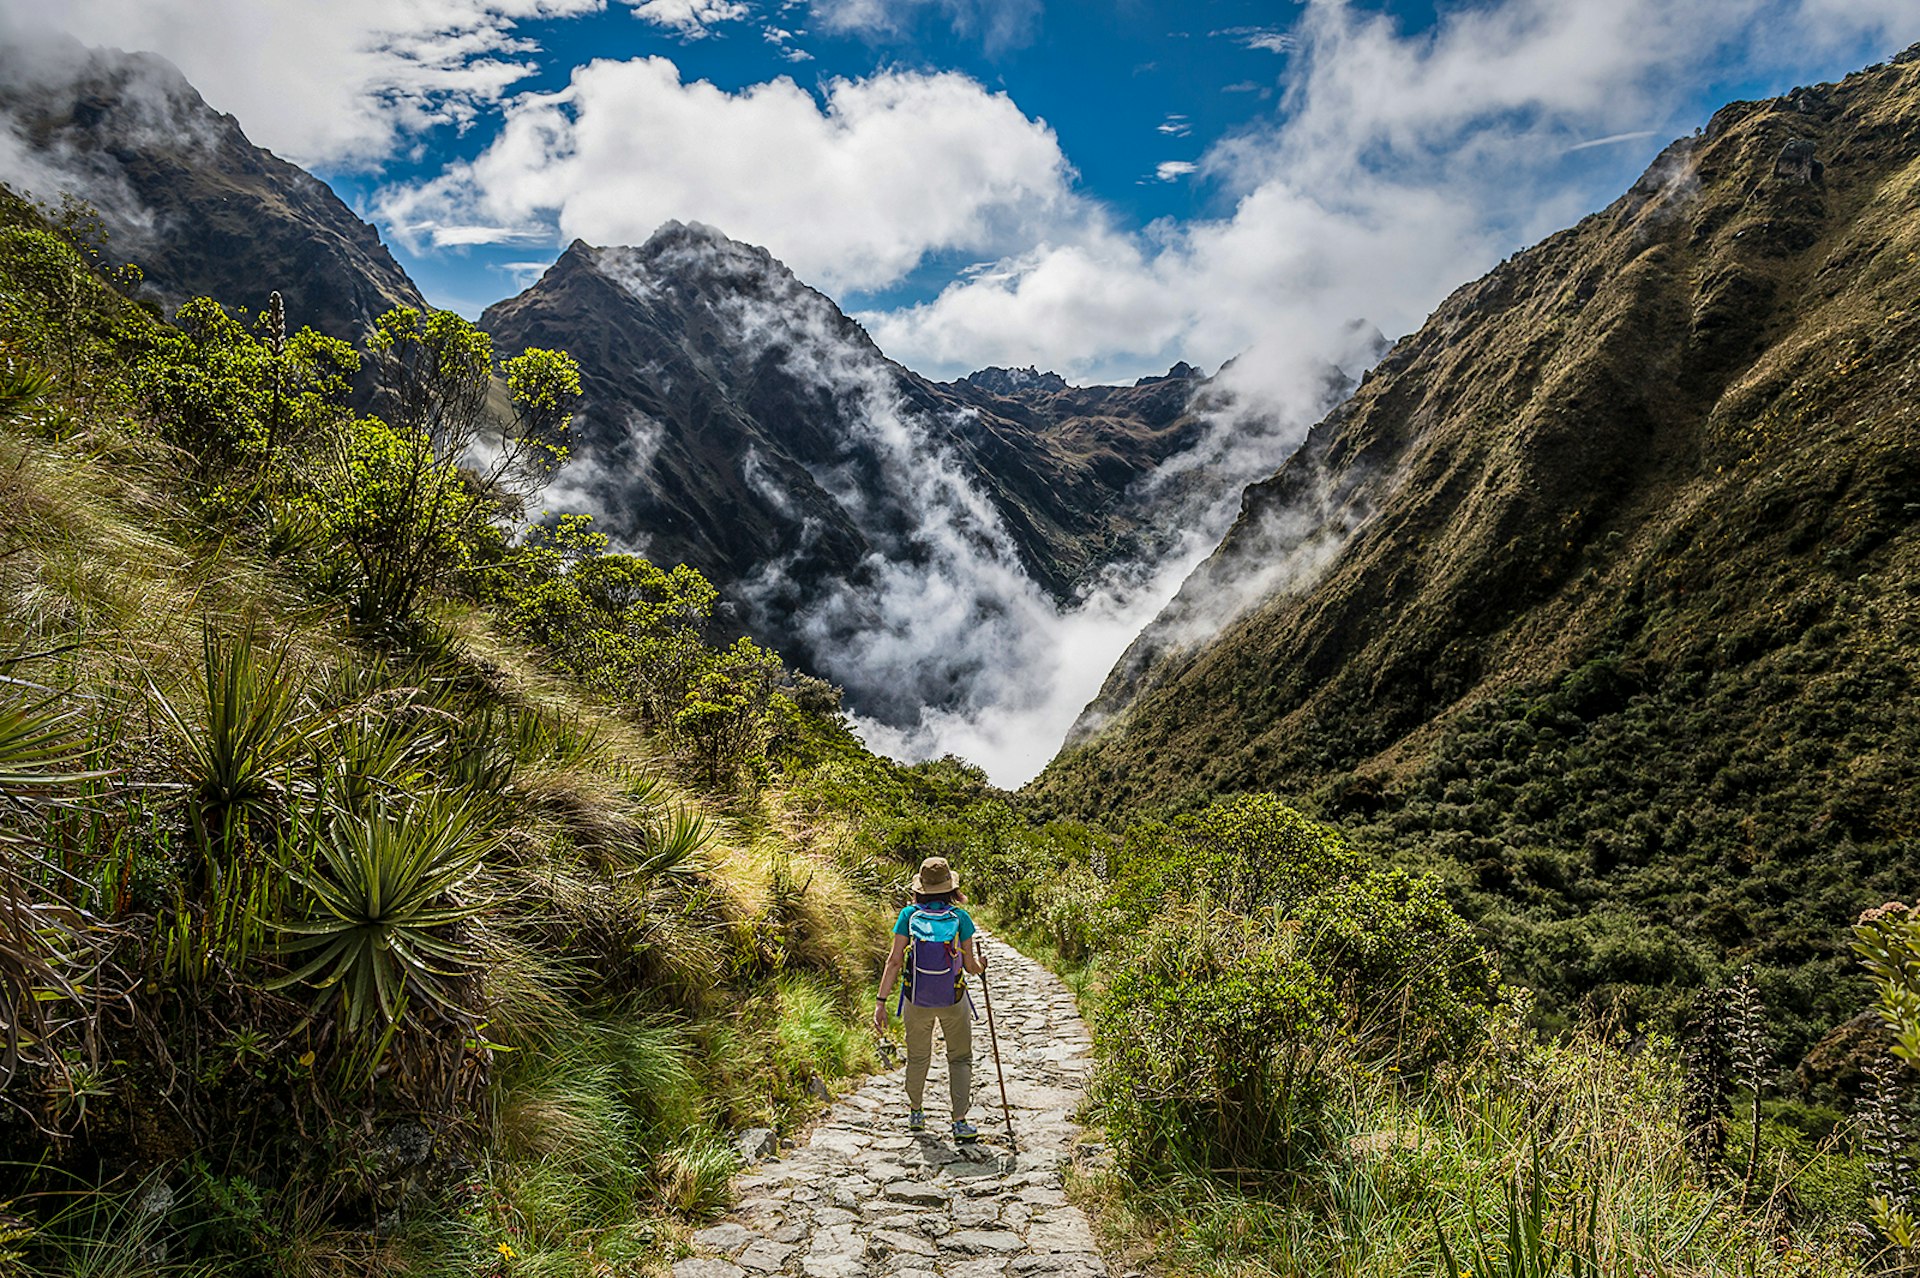 A woman in a sunhat walks down a stone path between two mountains on the Inca trail